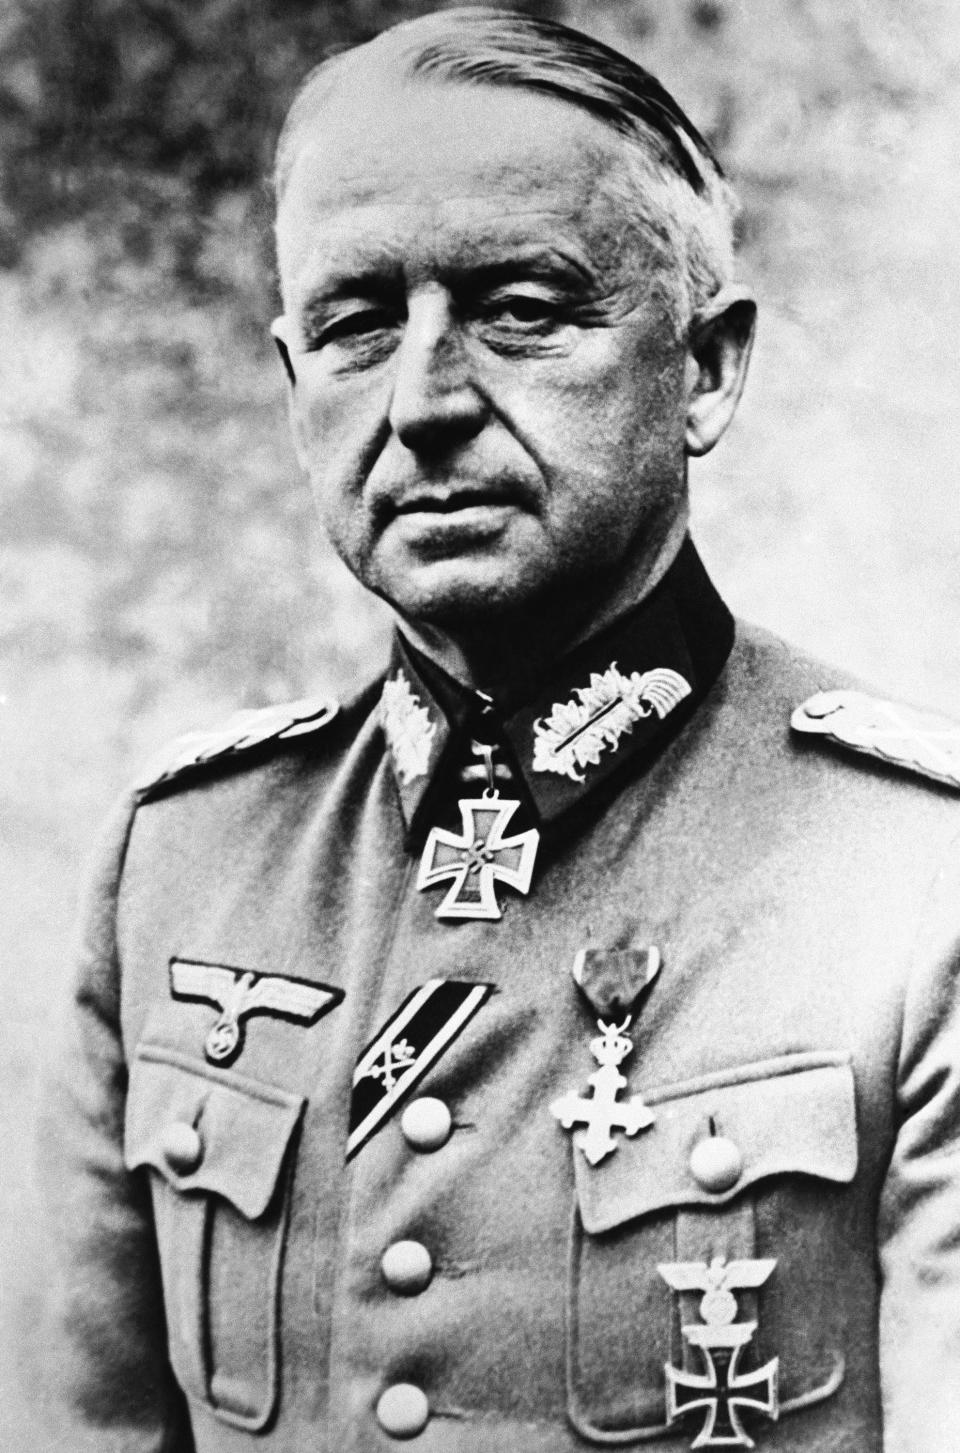 German Field Marshal Erich Von Manstein, in Germany, in 1942. After the war, in 1949, a British court-martial found him guilty of crimes including execution of civilians and mistreatment of prisoners of war.